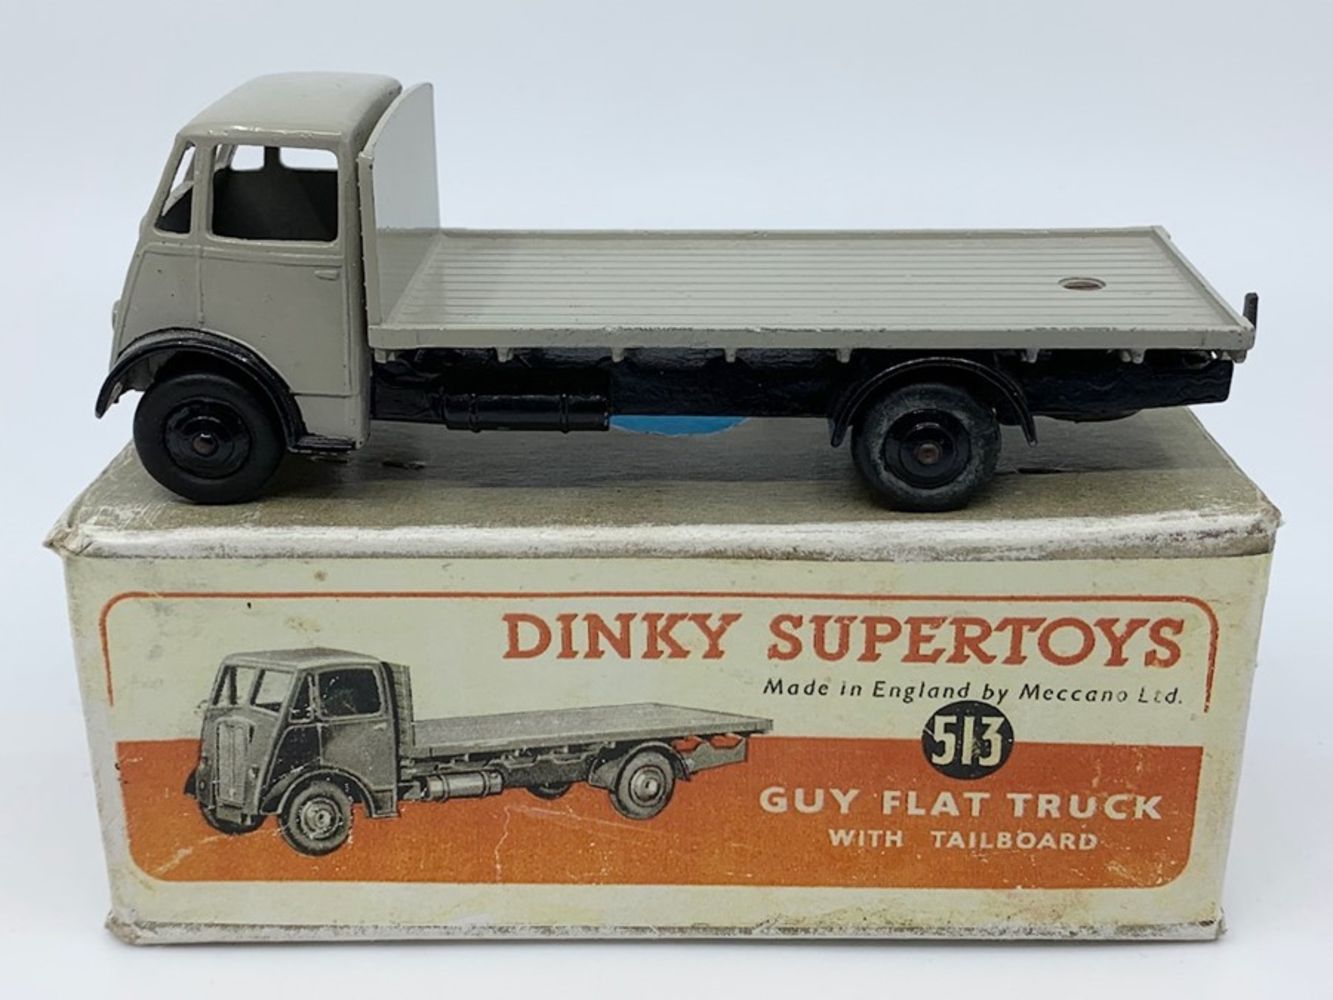 Toys, Models and Live Steam Auction - Webcast Only - Postage and Safe Click/Collect Only